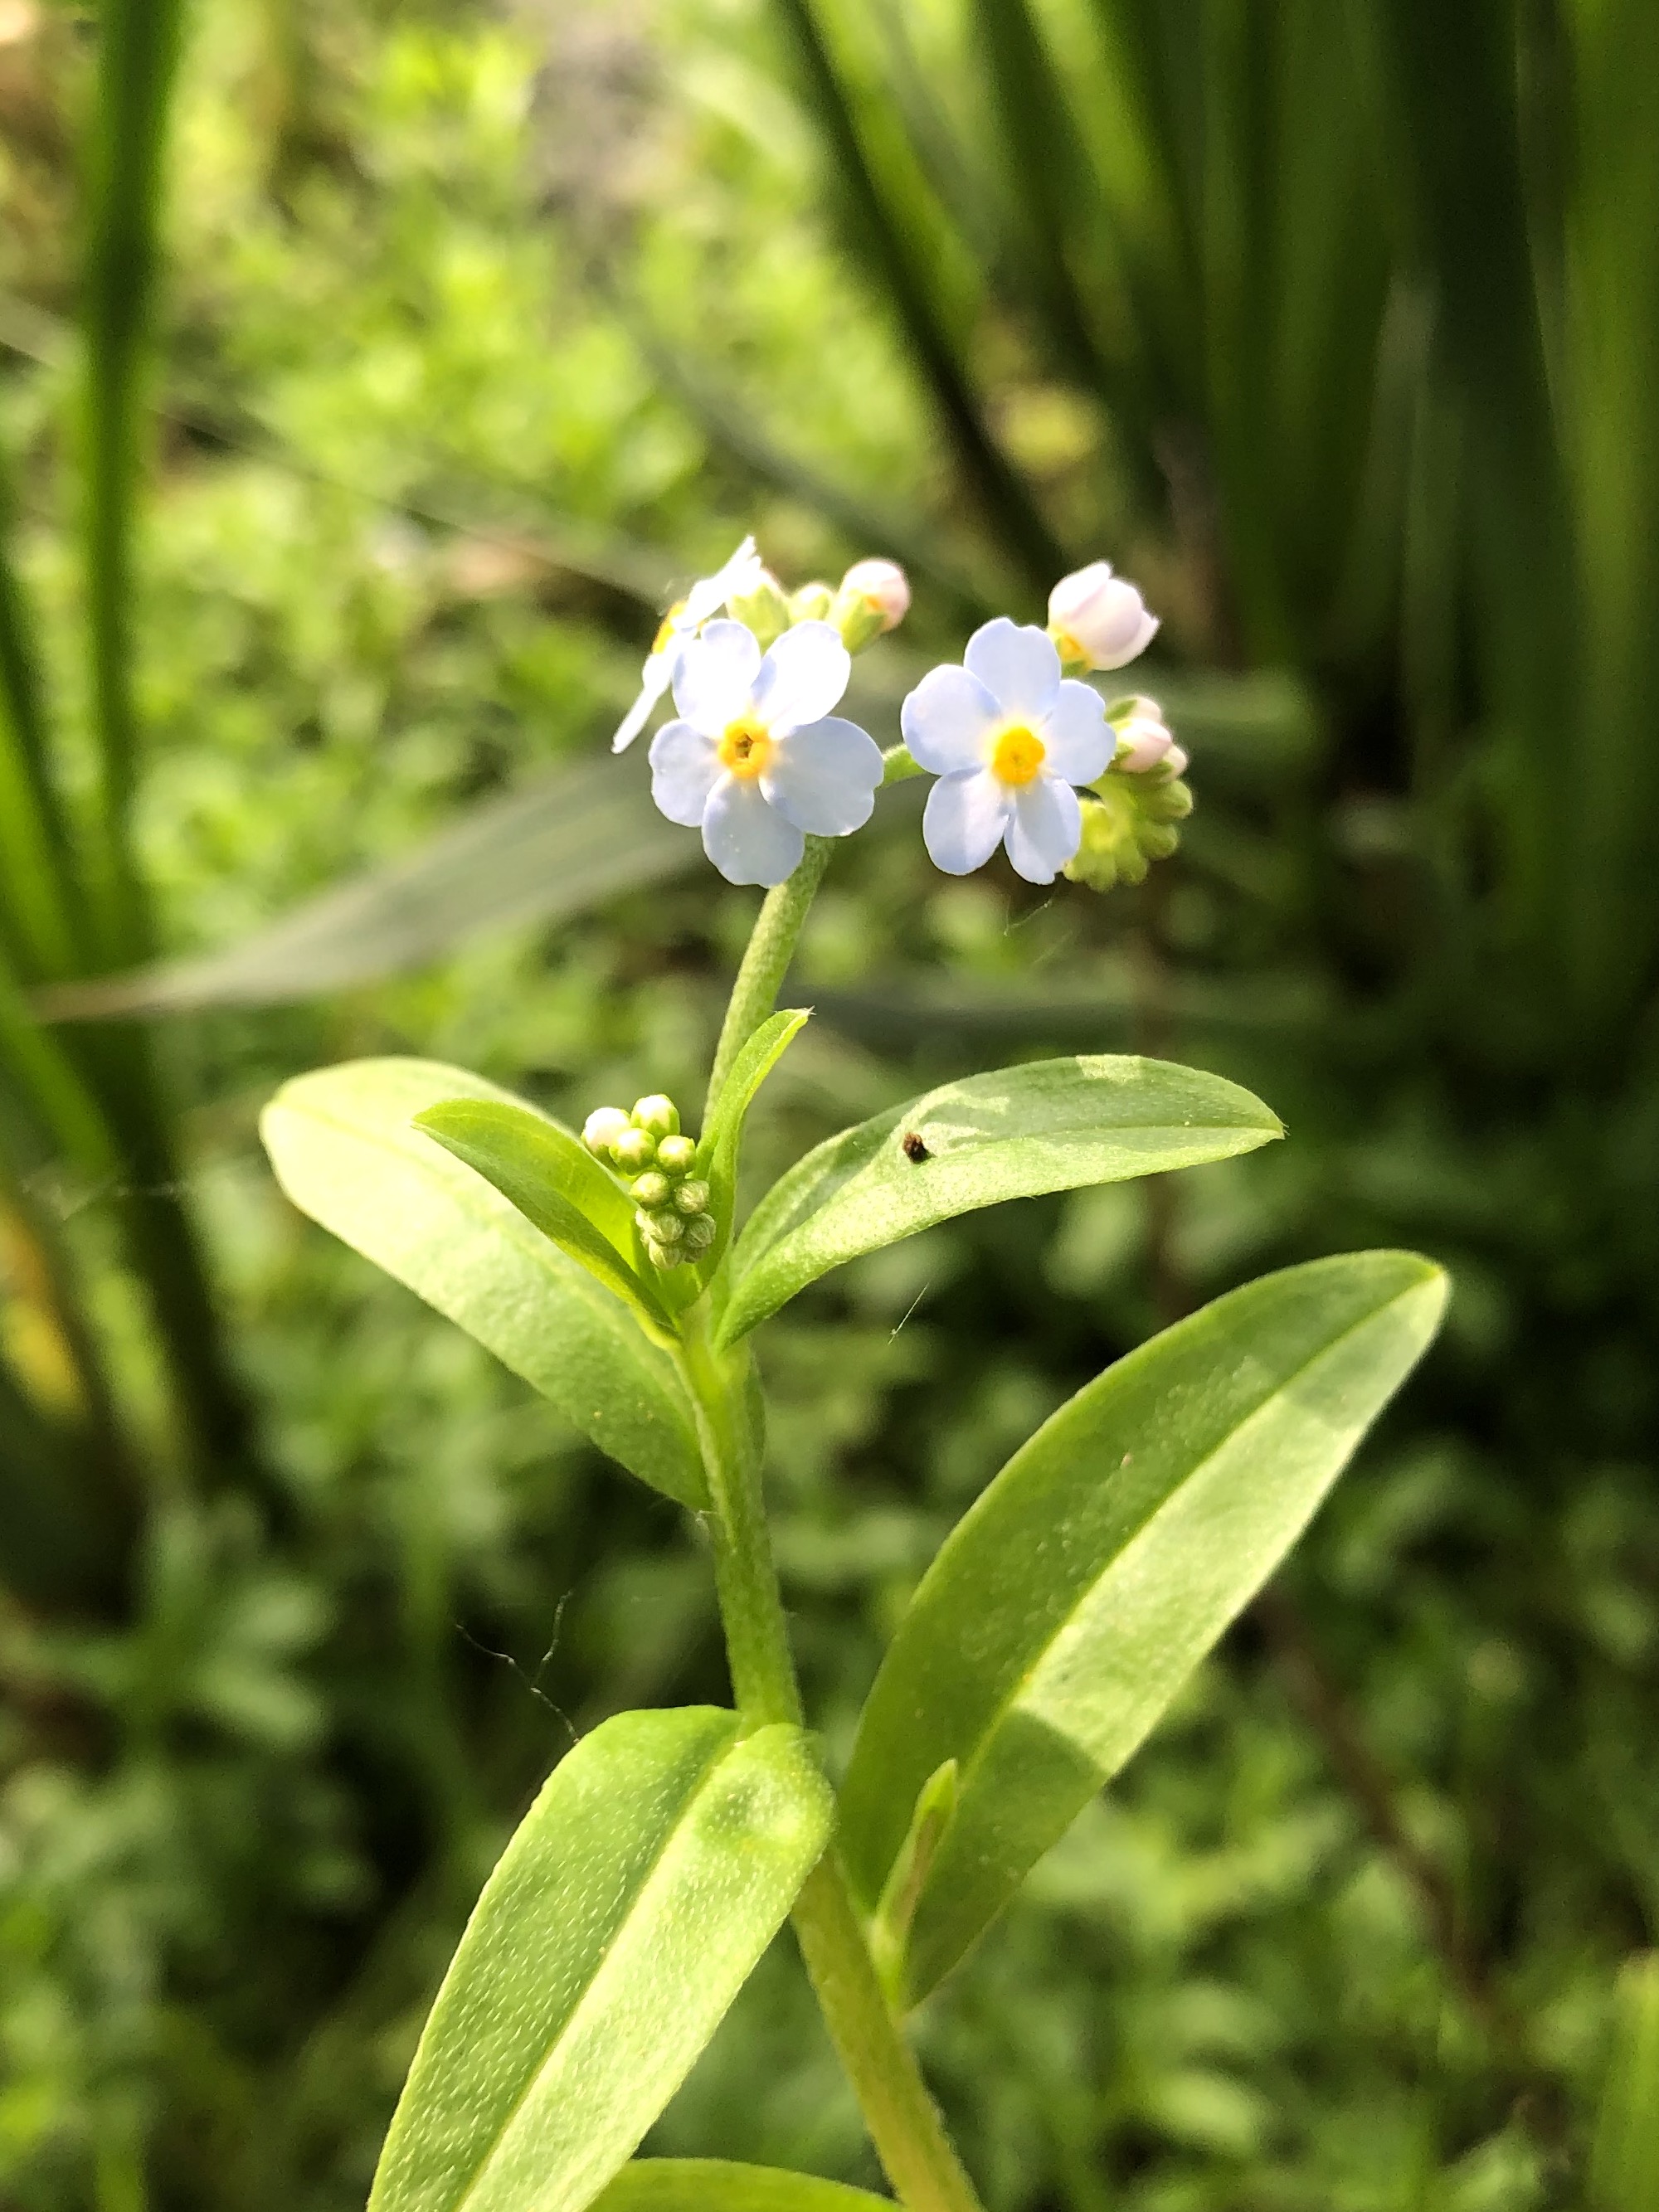 True Forget-me-not near cattails at Pickford Street stormwater outflow into Lake Wingra in Madison, Wisconsin on May 25, 2021.